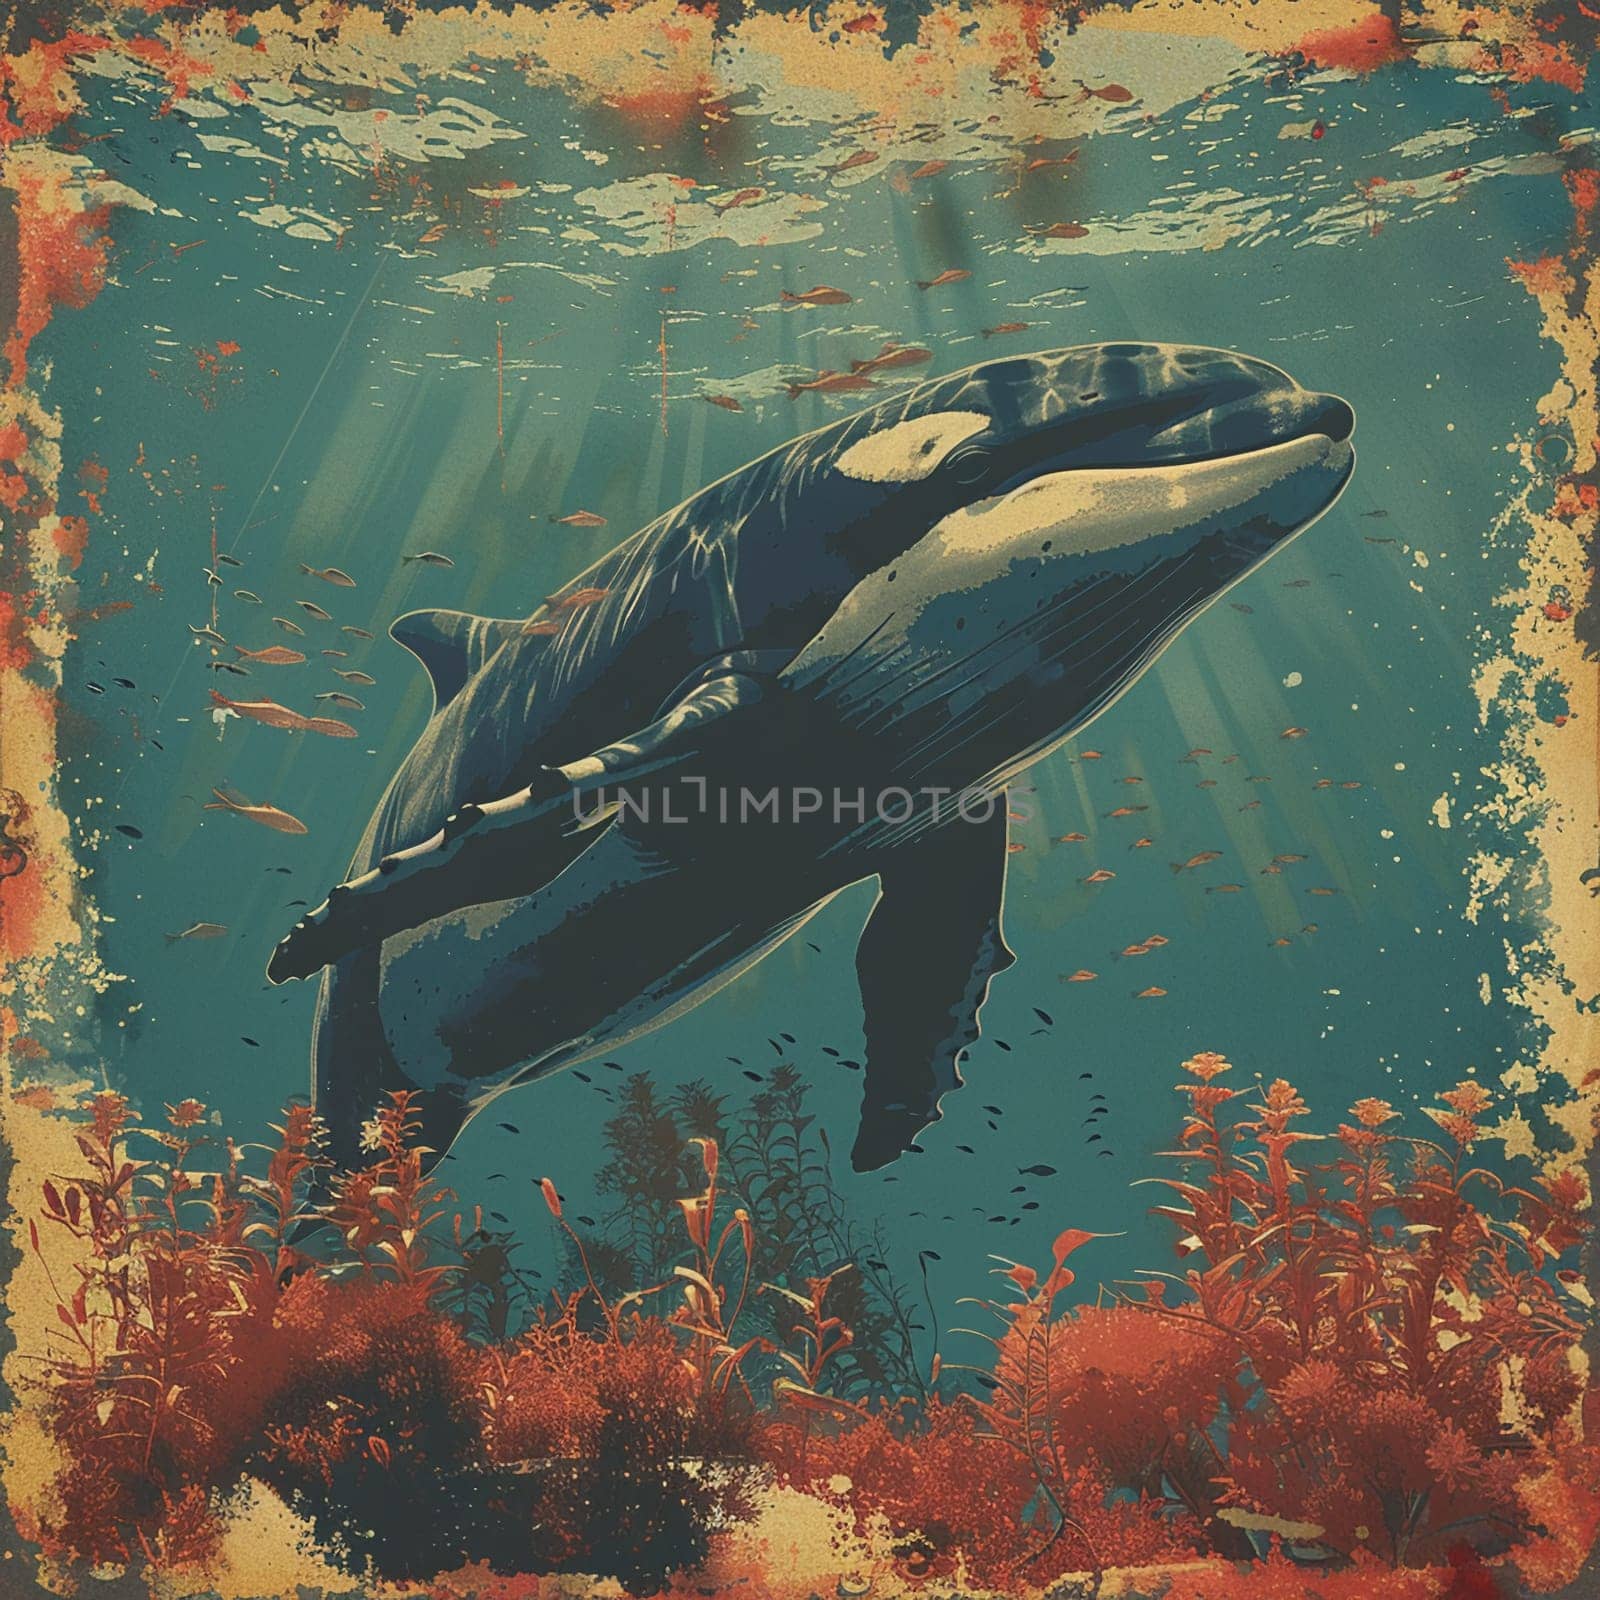 Vintage-style poster advocating for conservation of marine life on World Ocean Day.